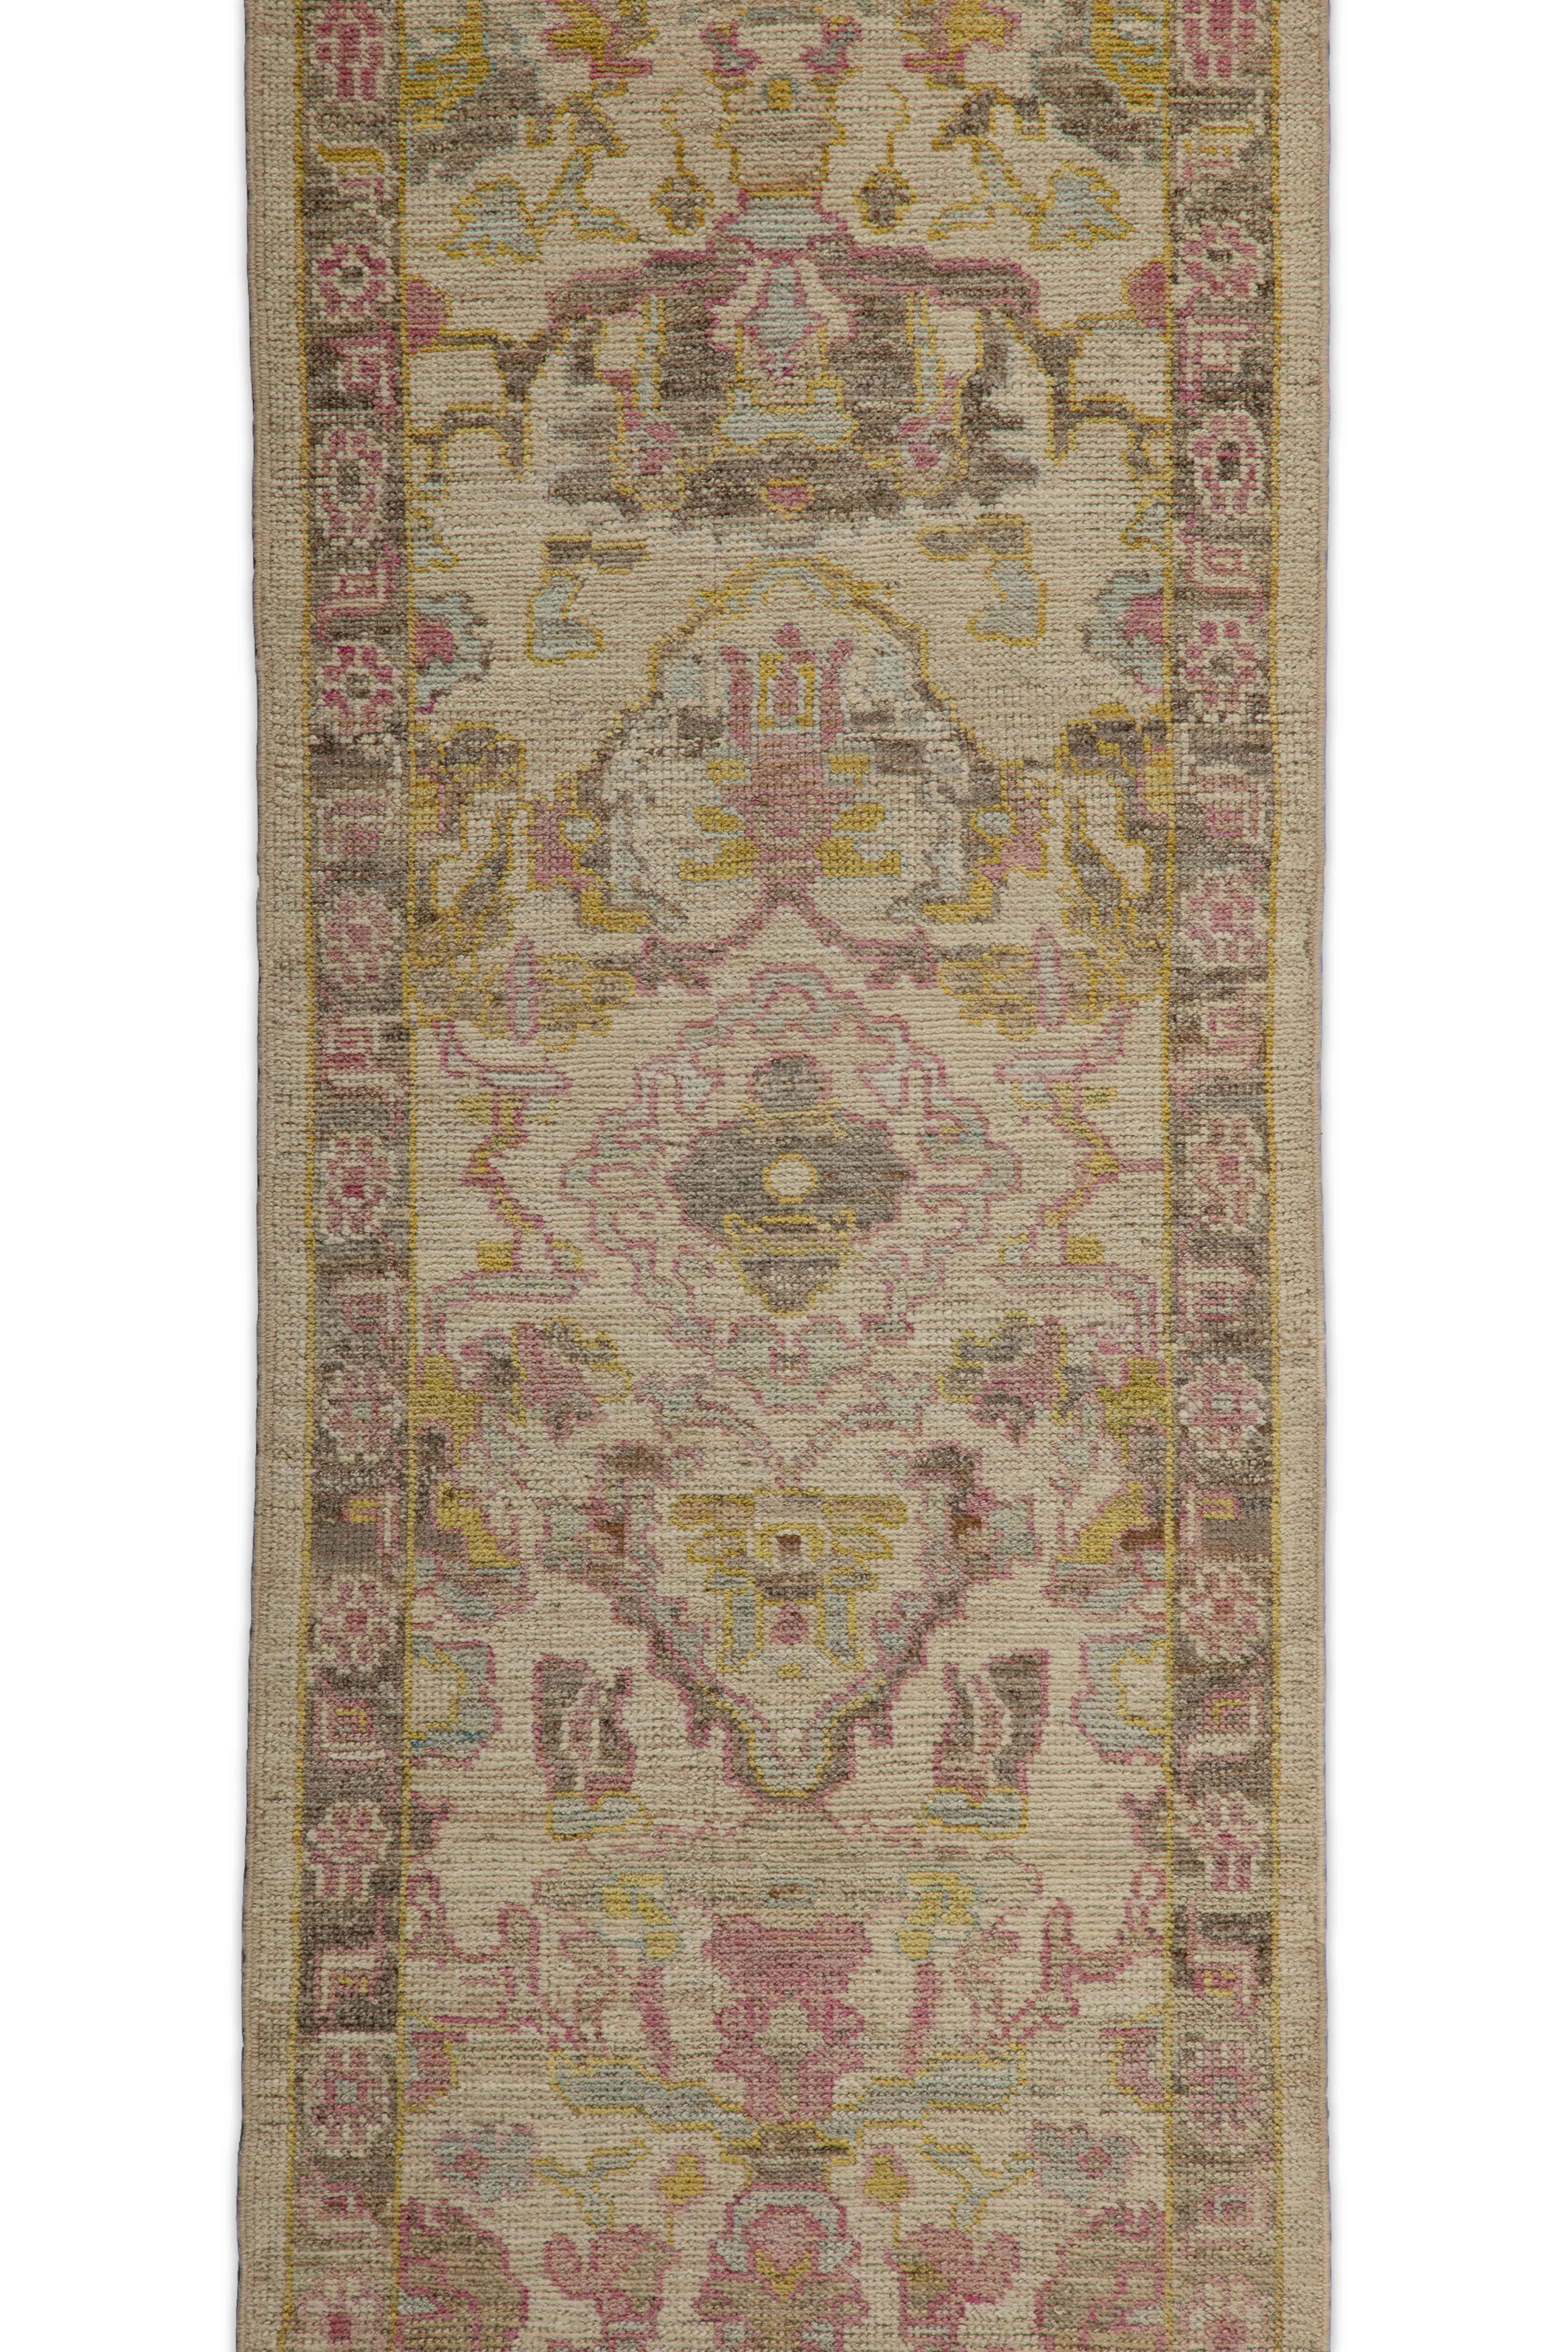 Turkish Contemporary Oushak Runner Rug from Turkey with Brown and Pink Floral Patterns For Sale